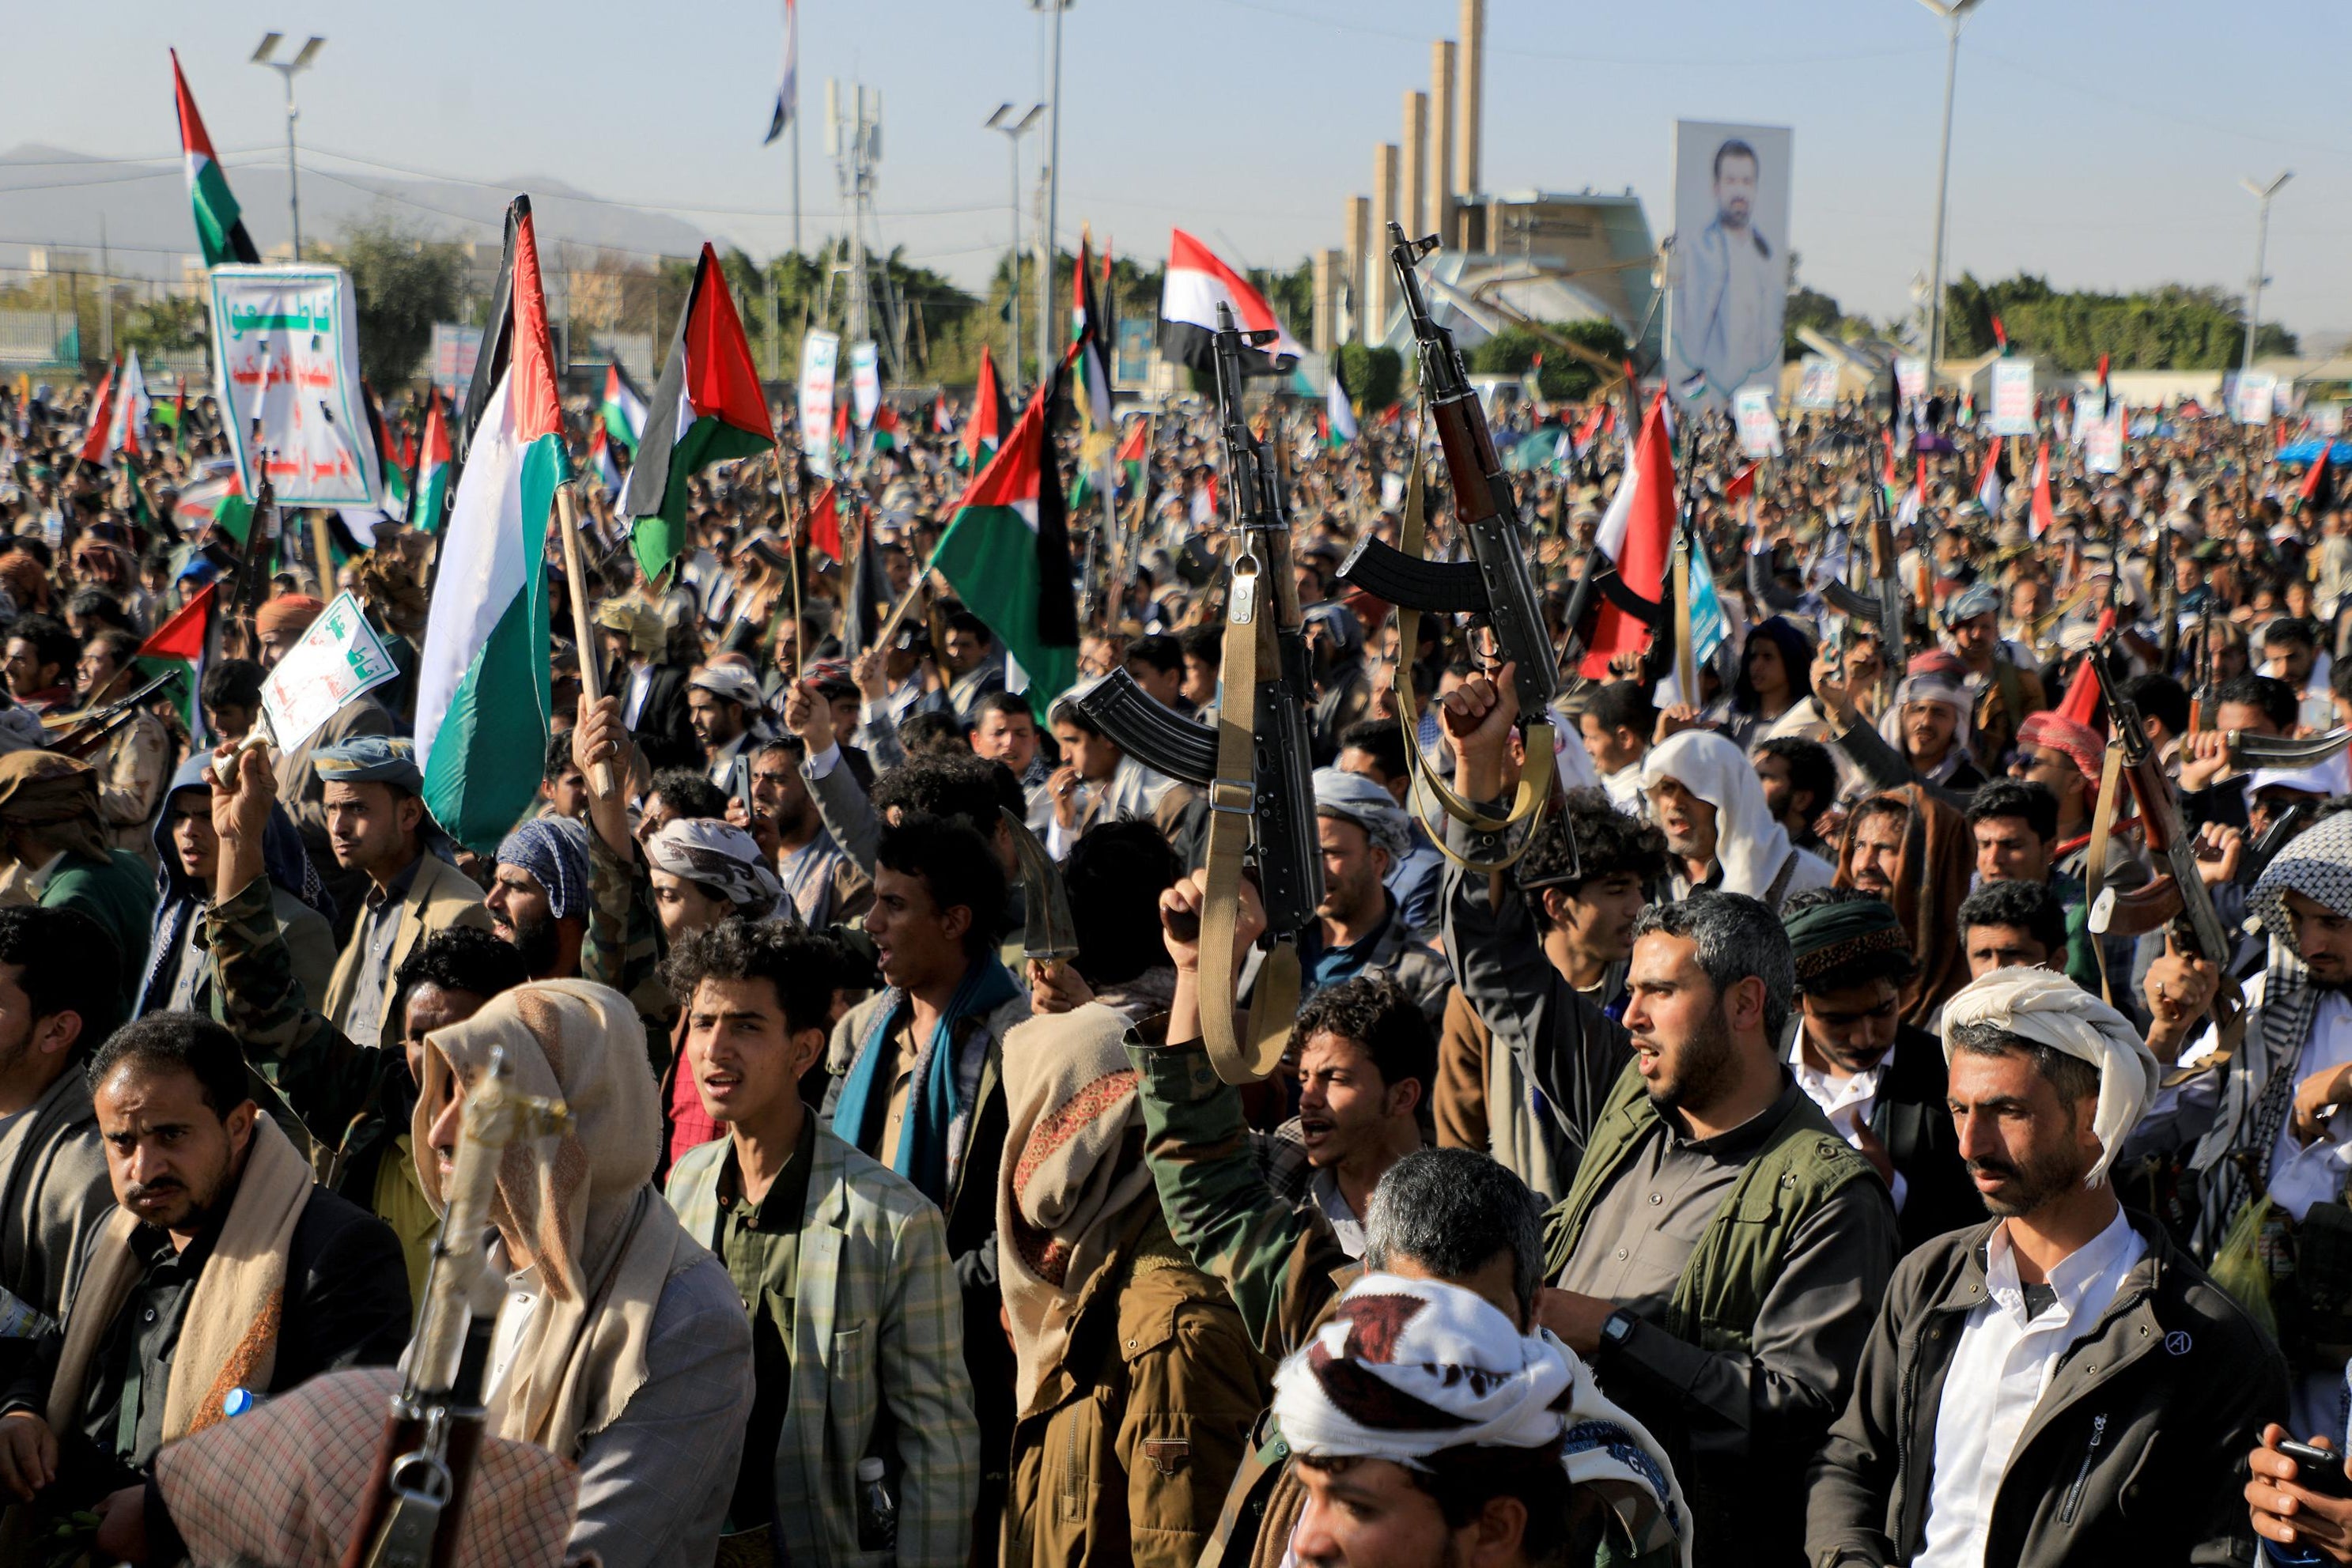 A large group of people, some holding Palestinian flags and guns in the air.